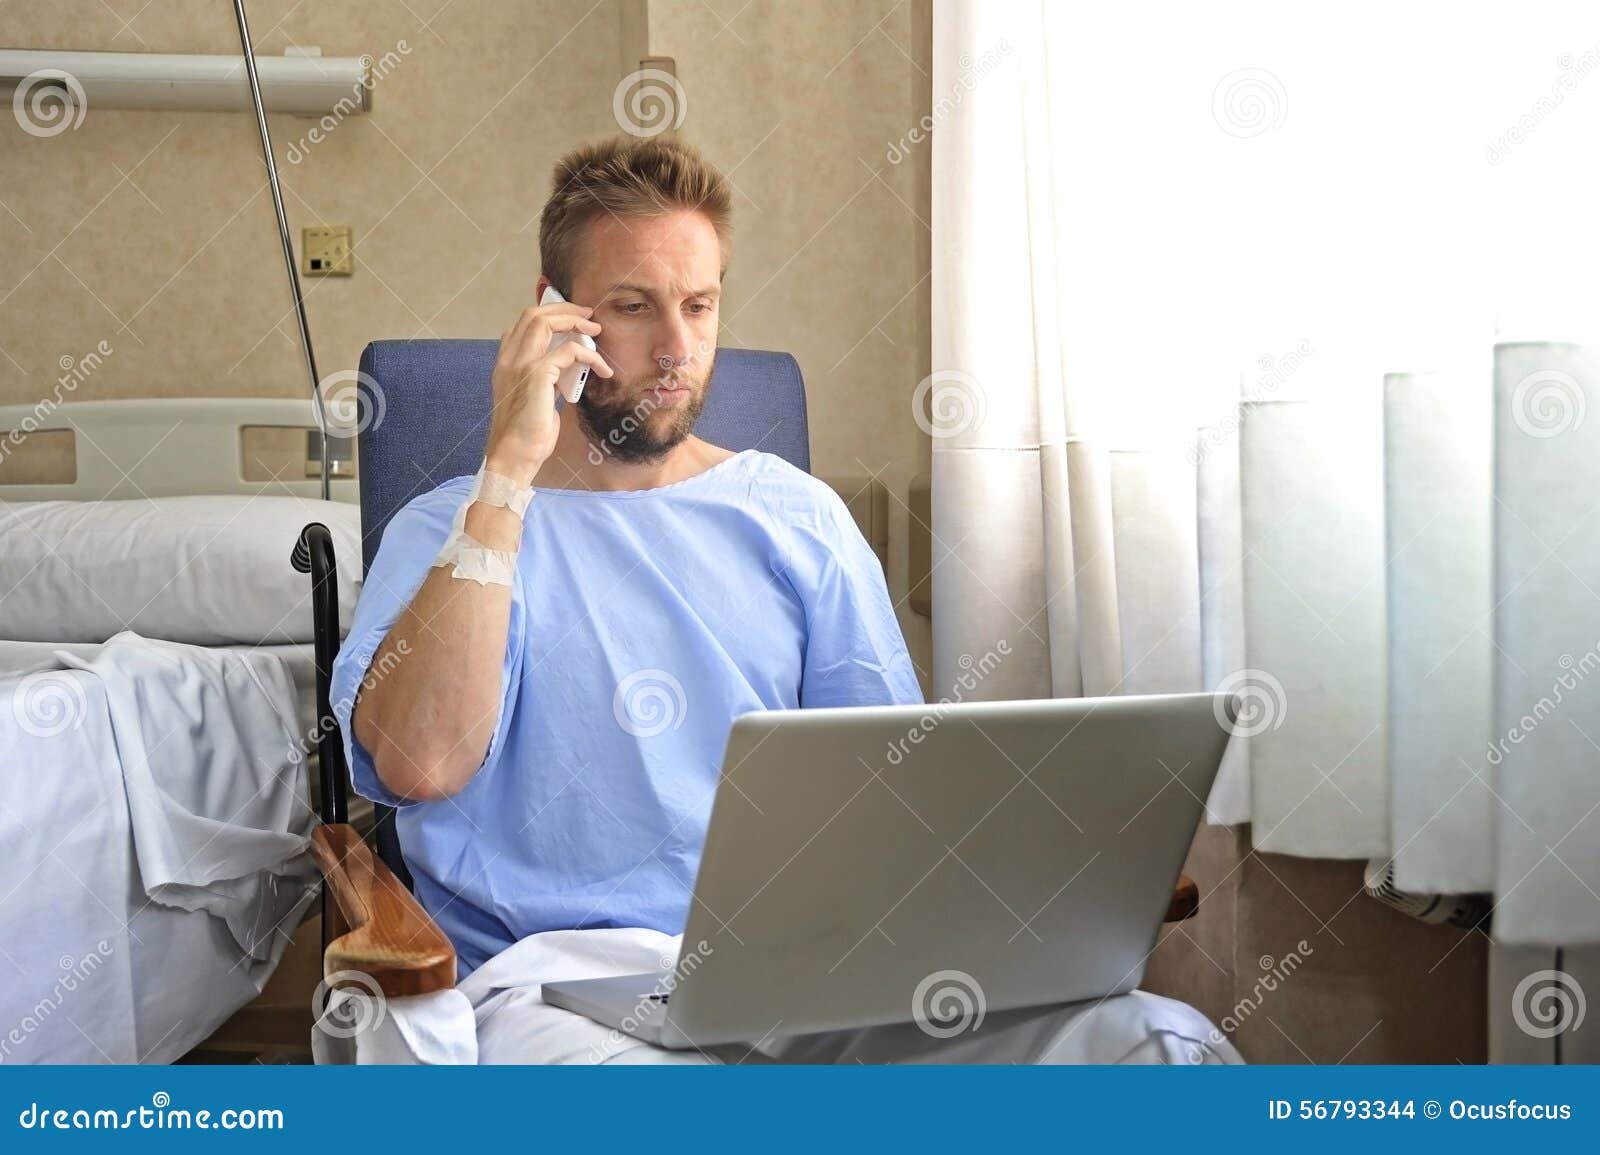 young workaholic business man in hospital room sick and injured after accident working with mobile phone and computer laptop